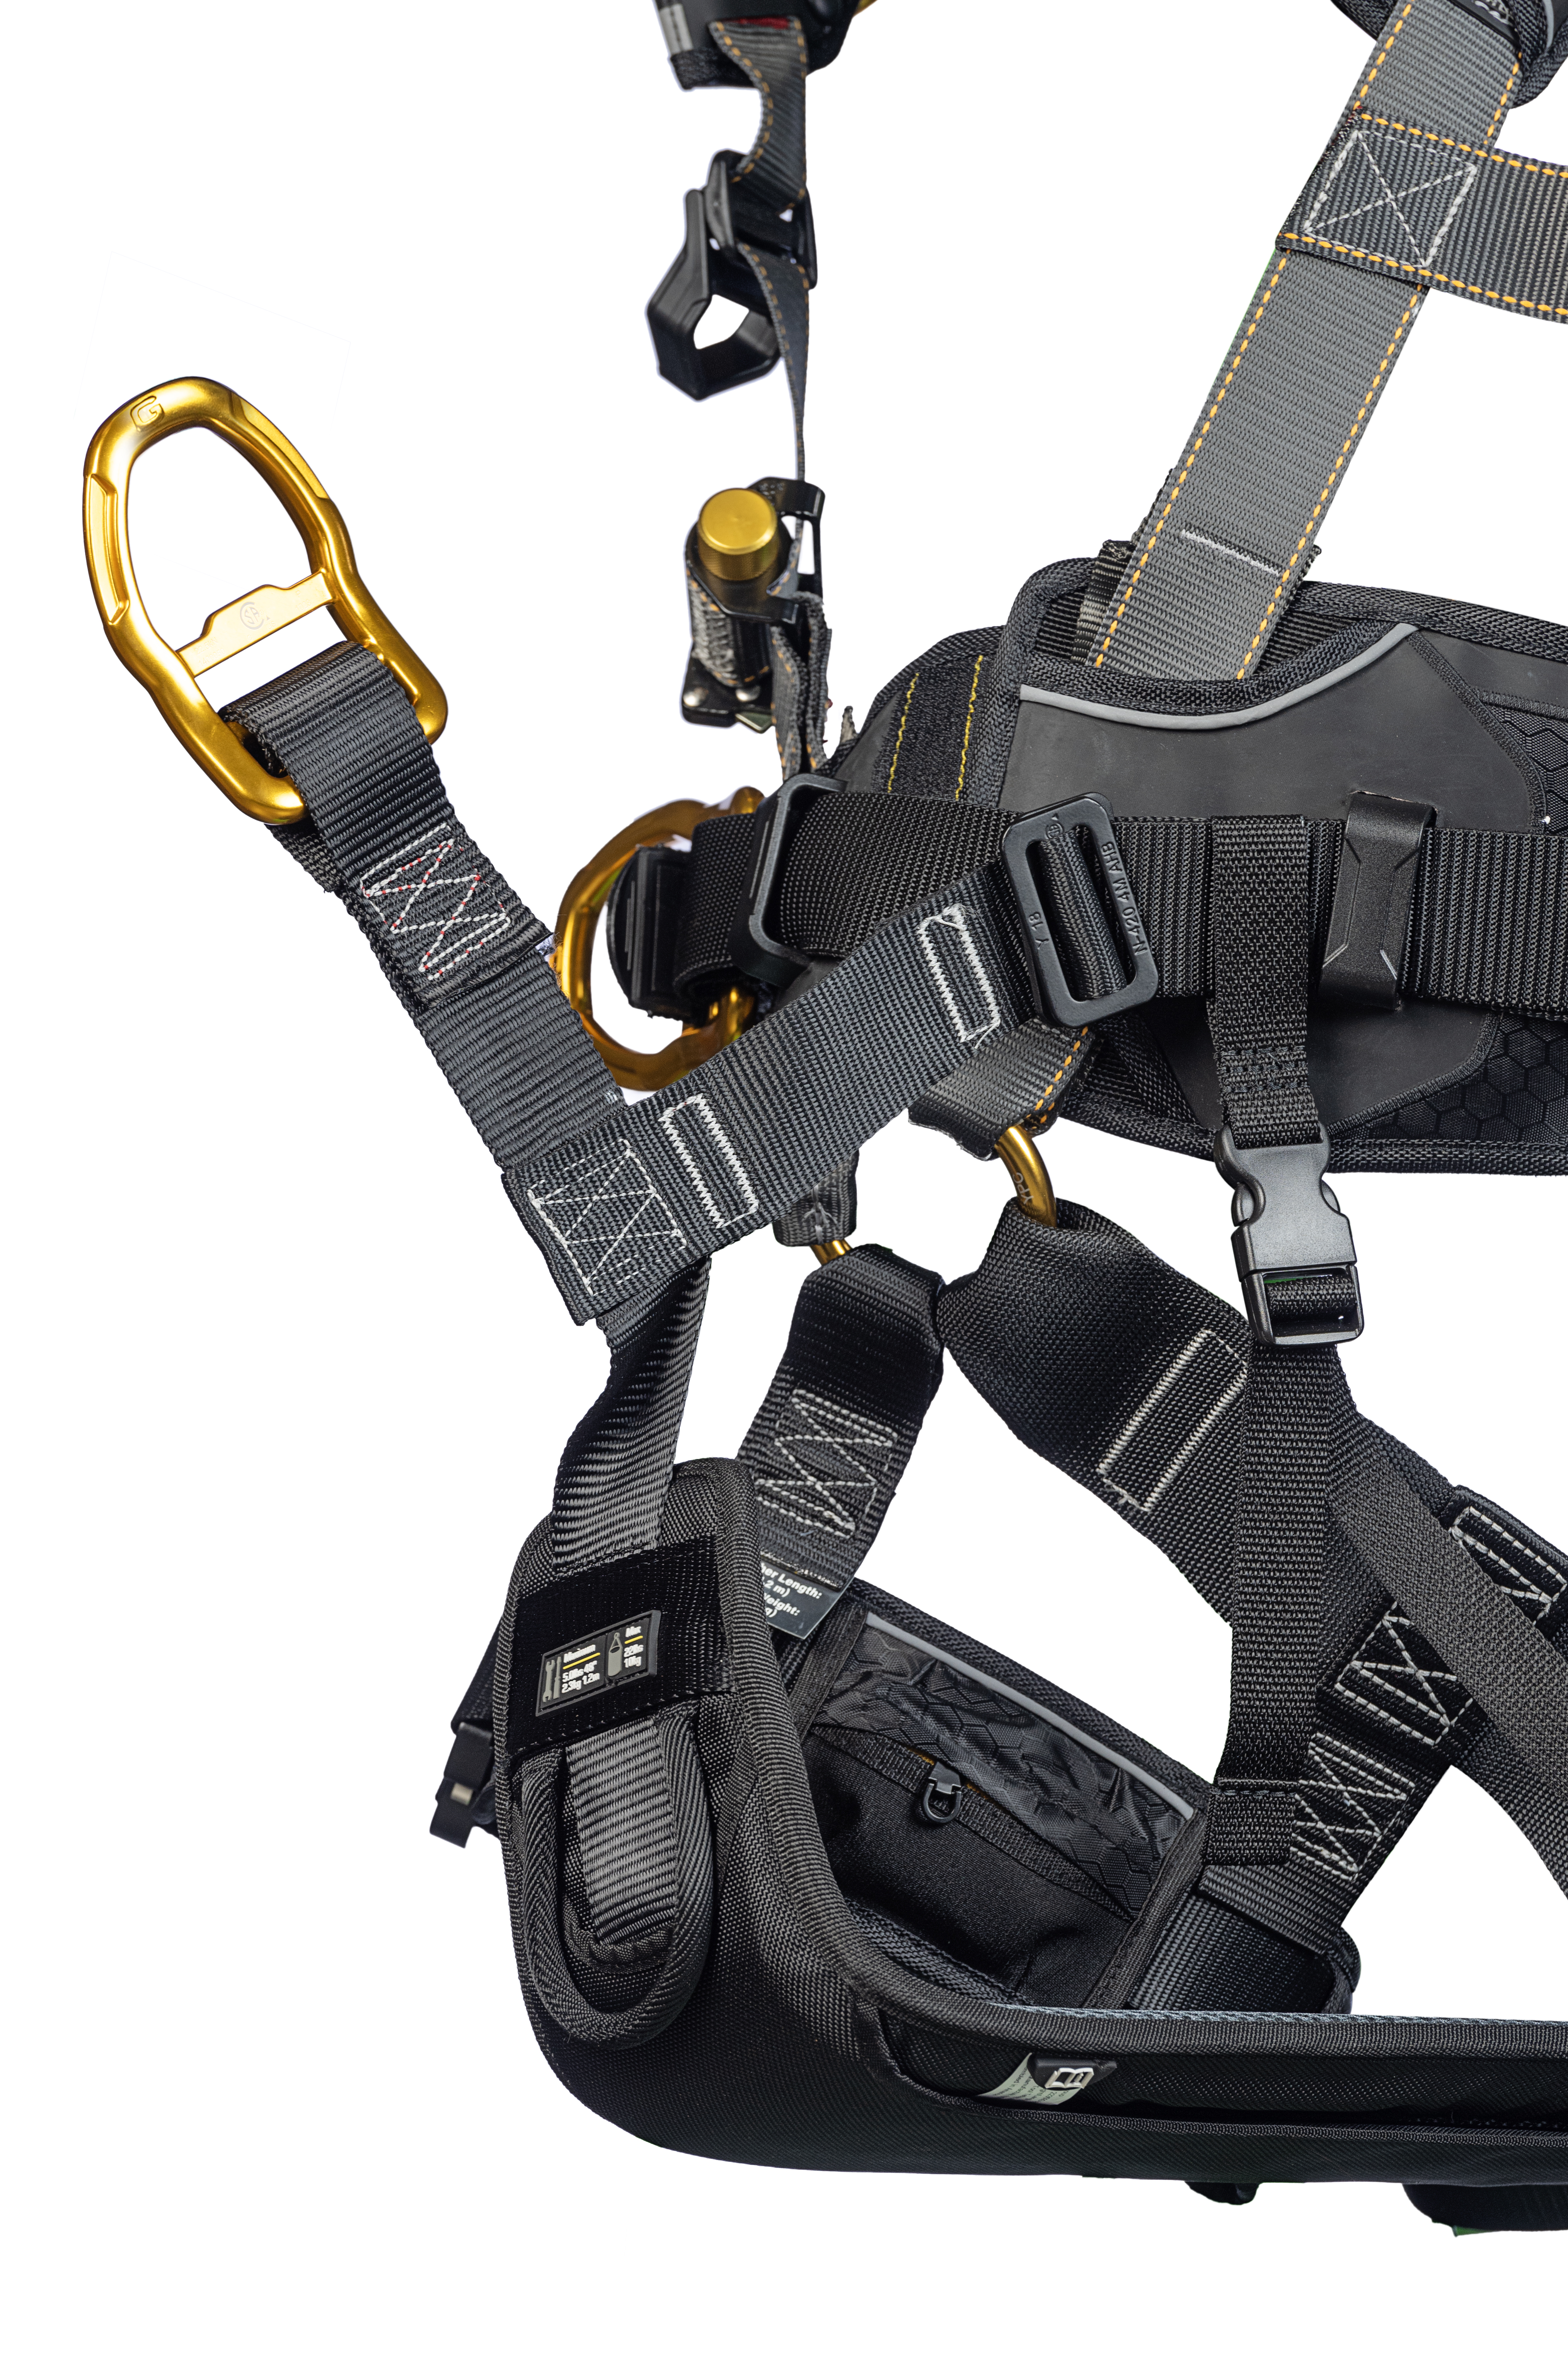 Guardian B7-Comfort Tower Climbing Harness from Columbia Safety